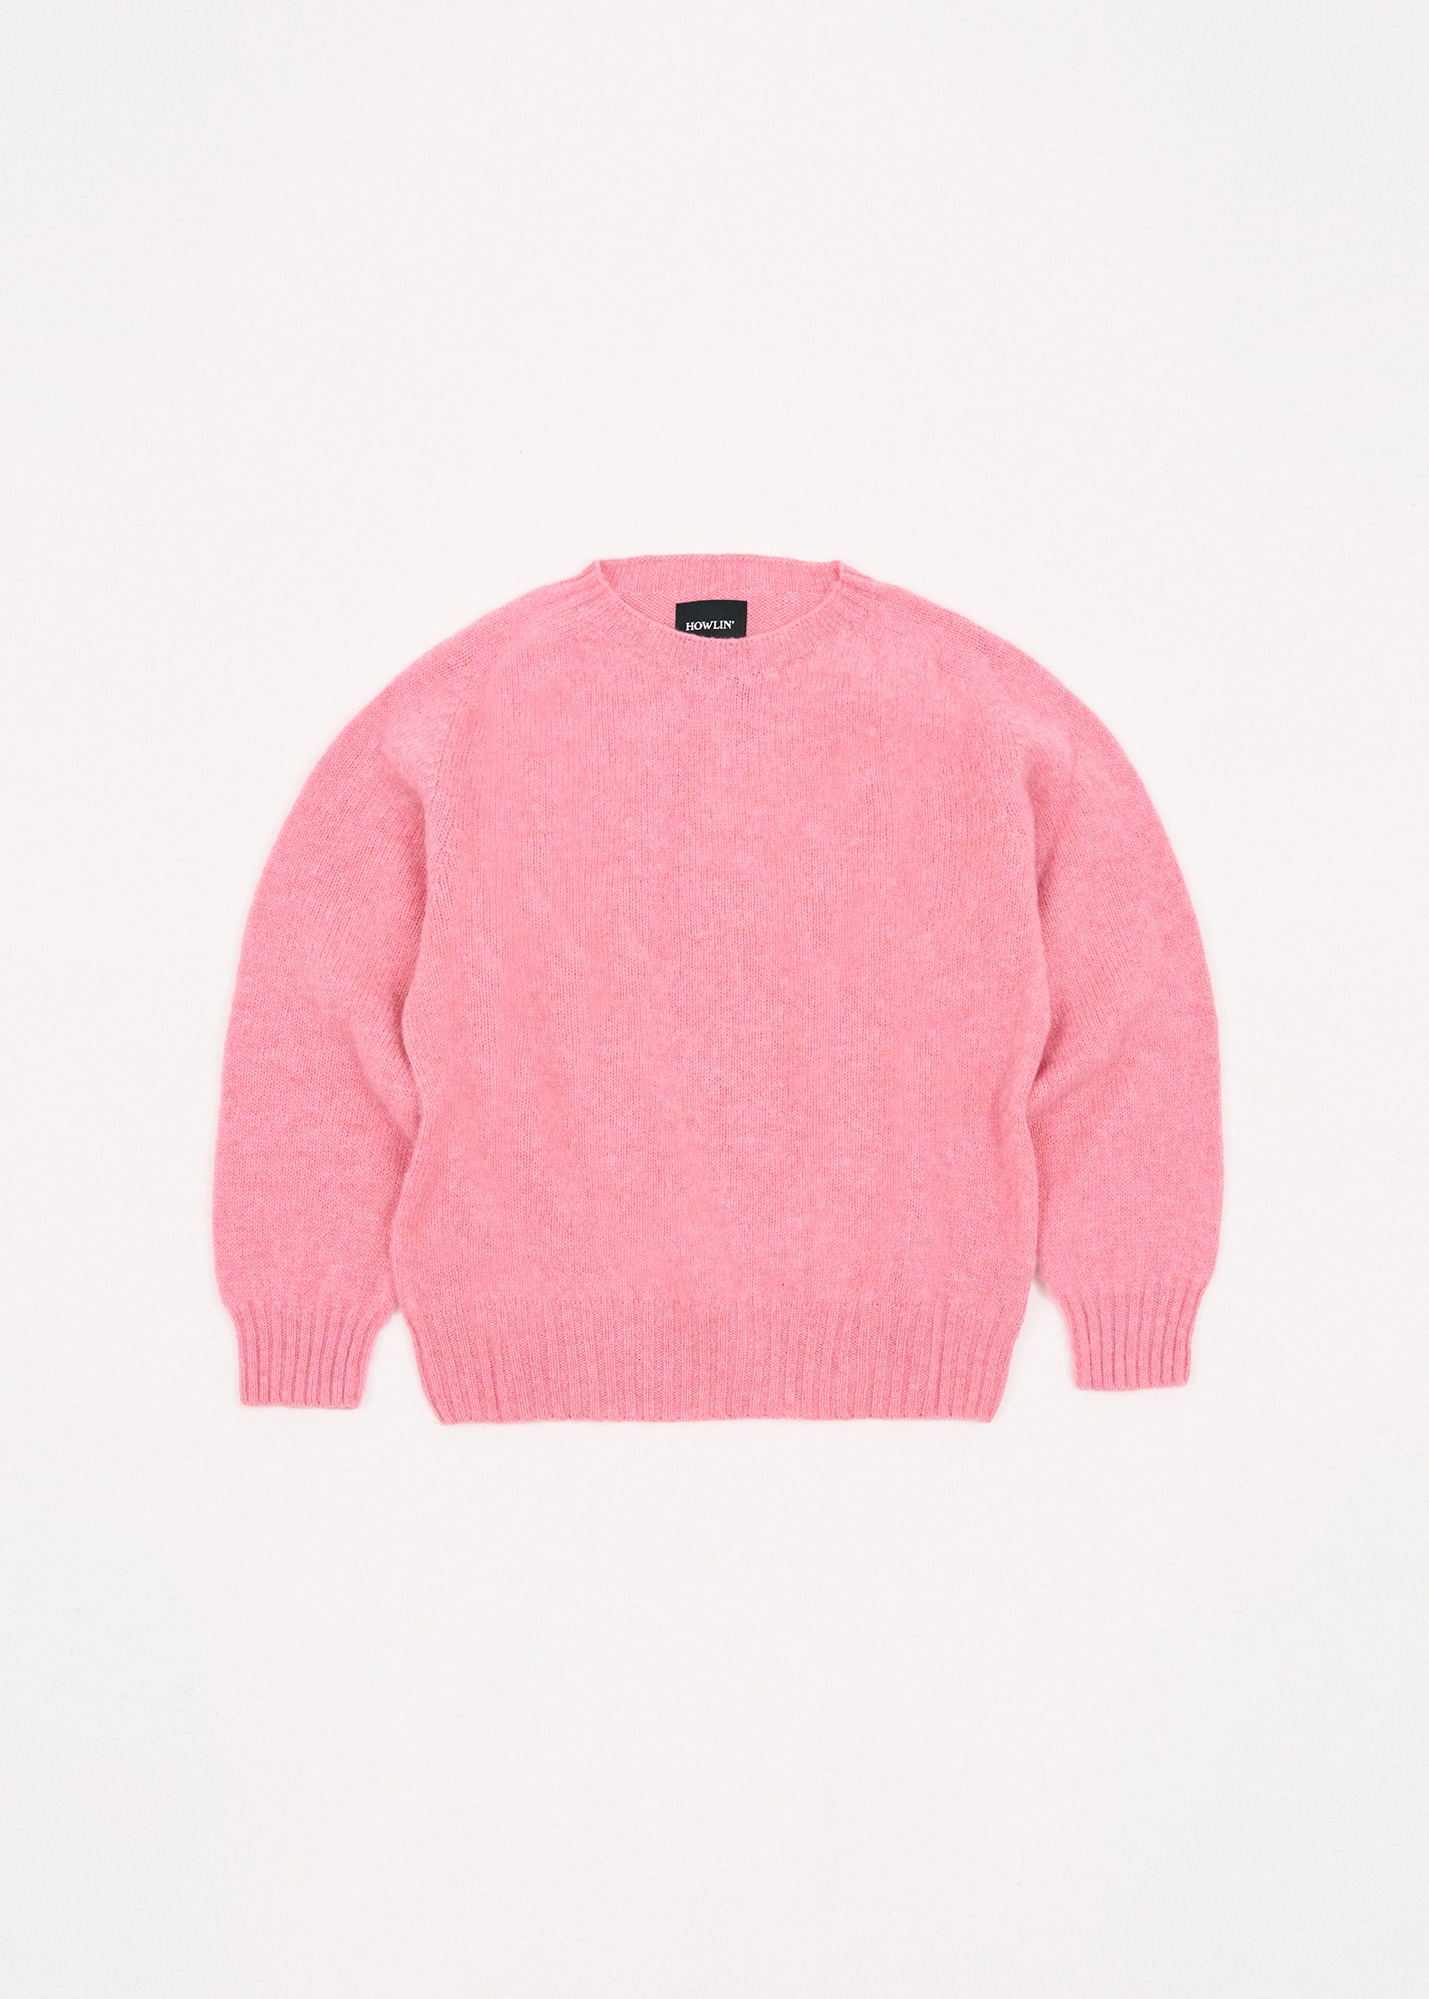 FOREVERNEVERMORE SWEATER PINK